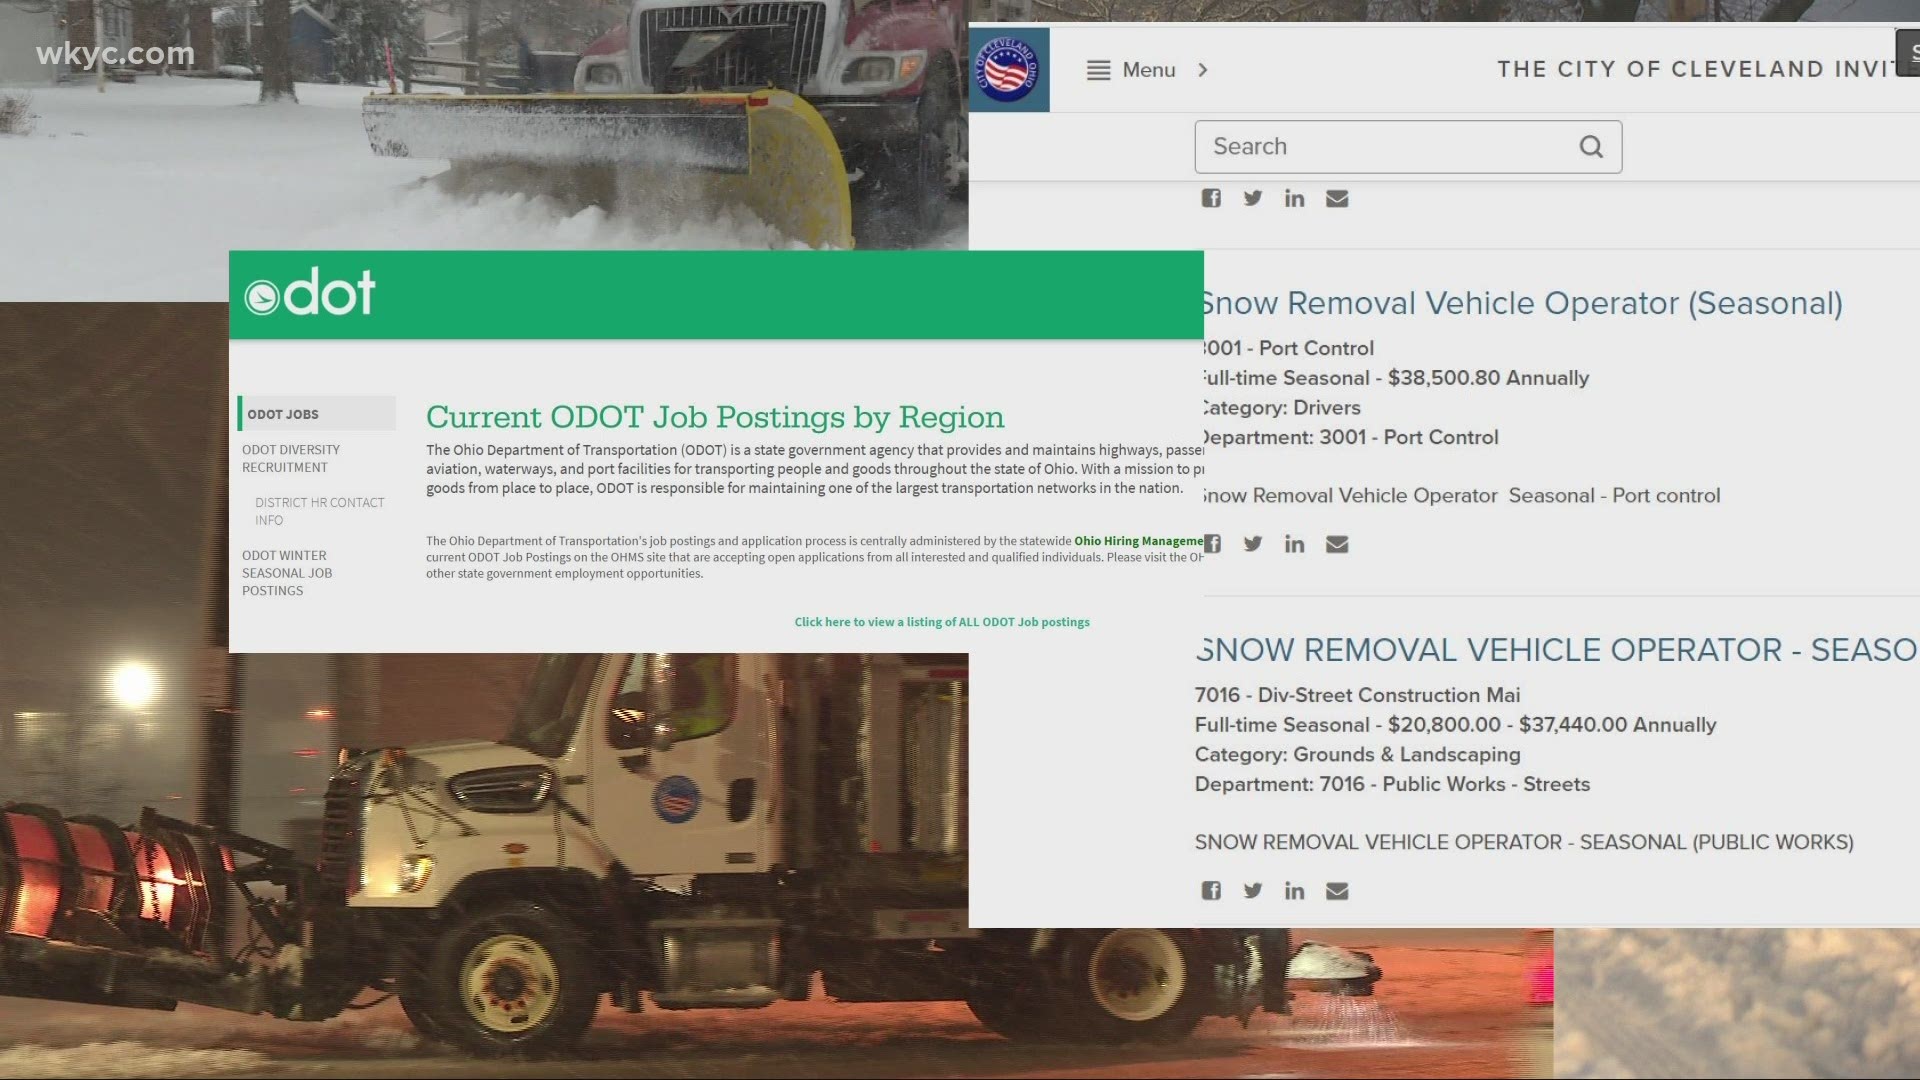 They say preparation is the key to success. So why are two Ohio agencies searching for seasonal plow drivers now, amid a snowstorm? Rachel Polansky reports.